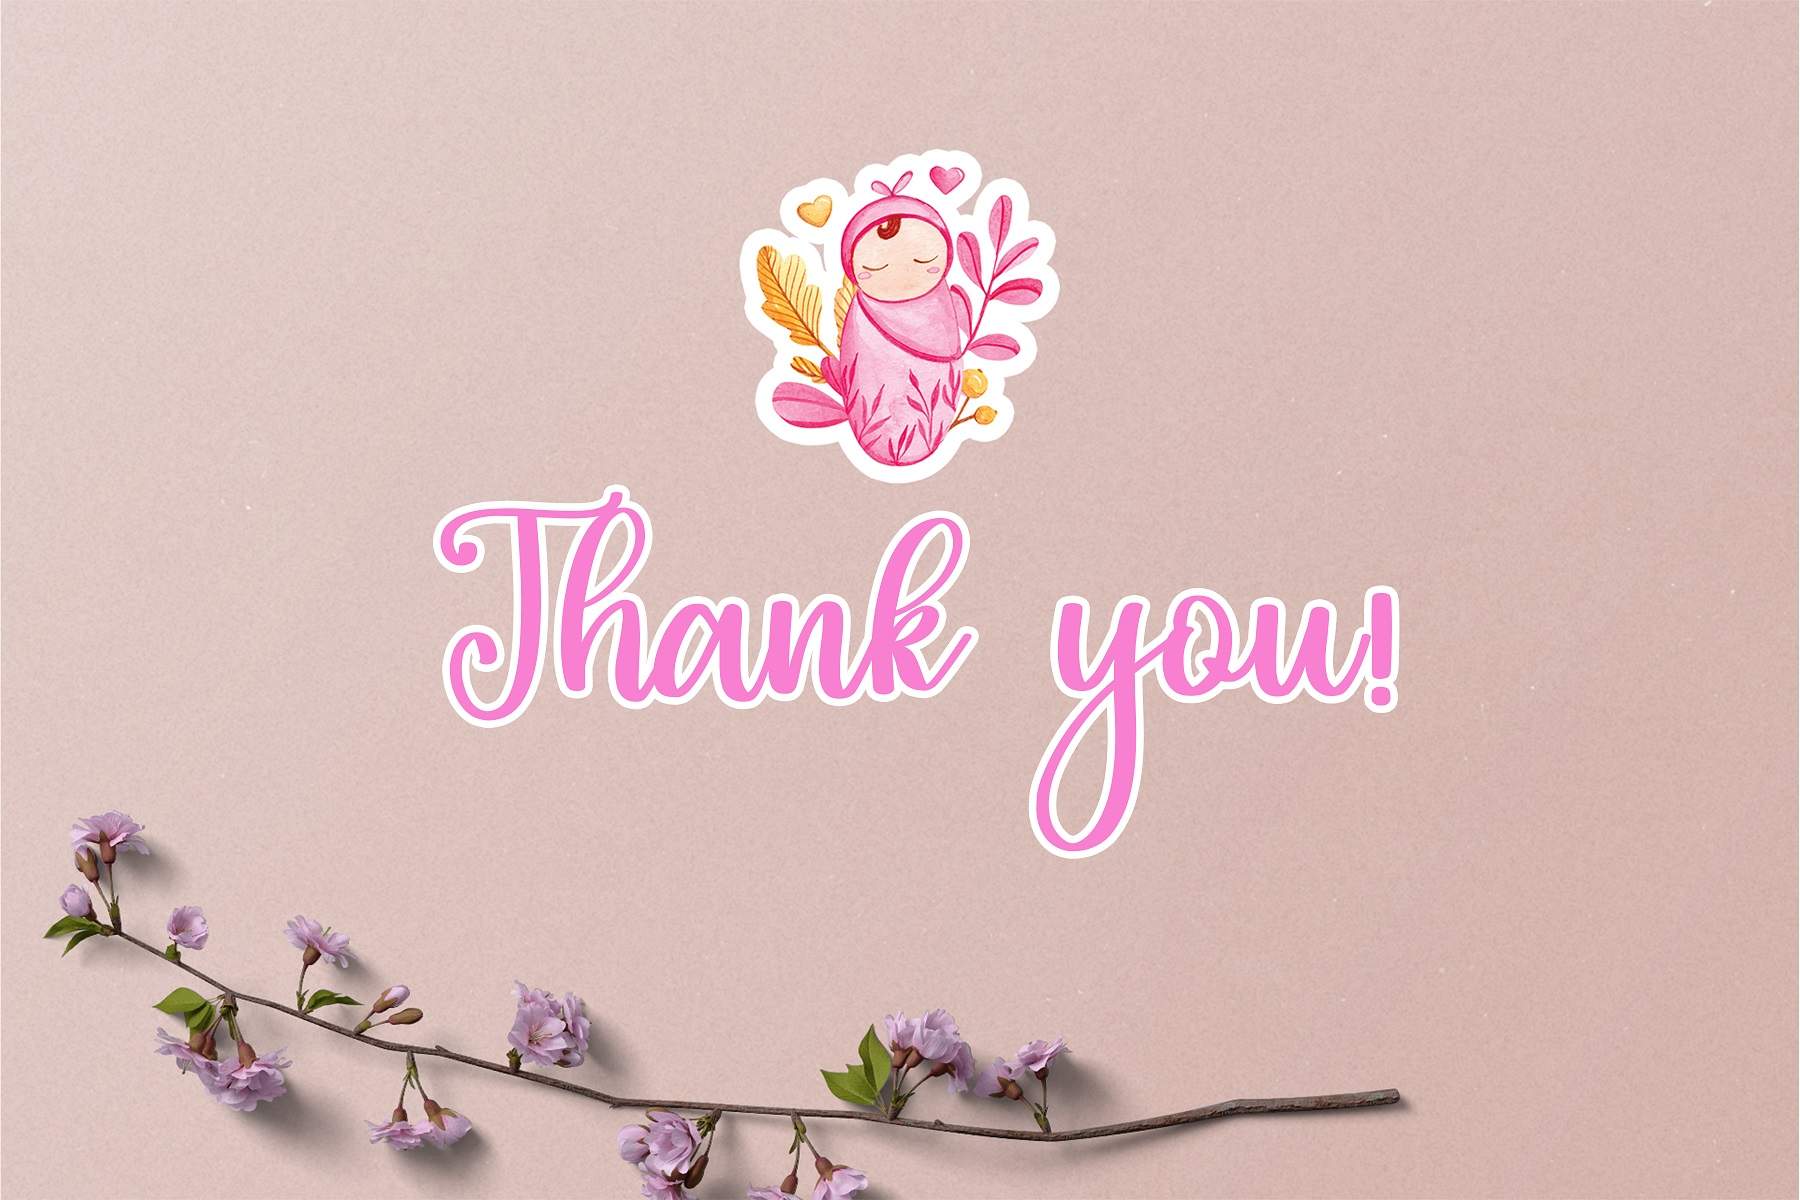 Thank you card with pink flowers on a pink background.